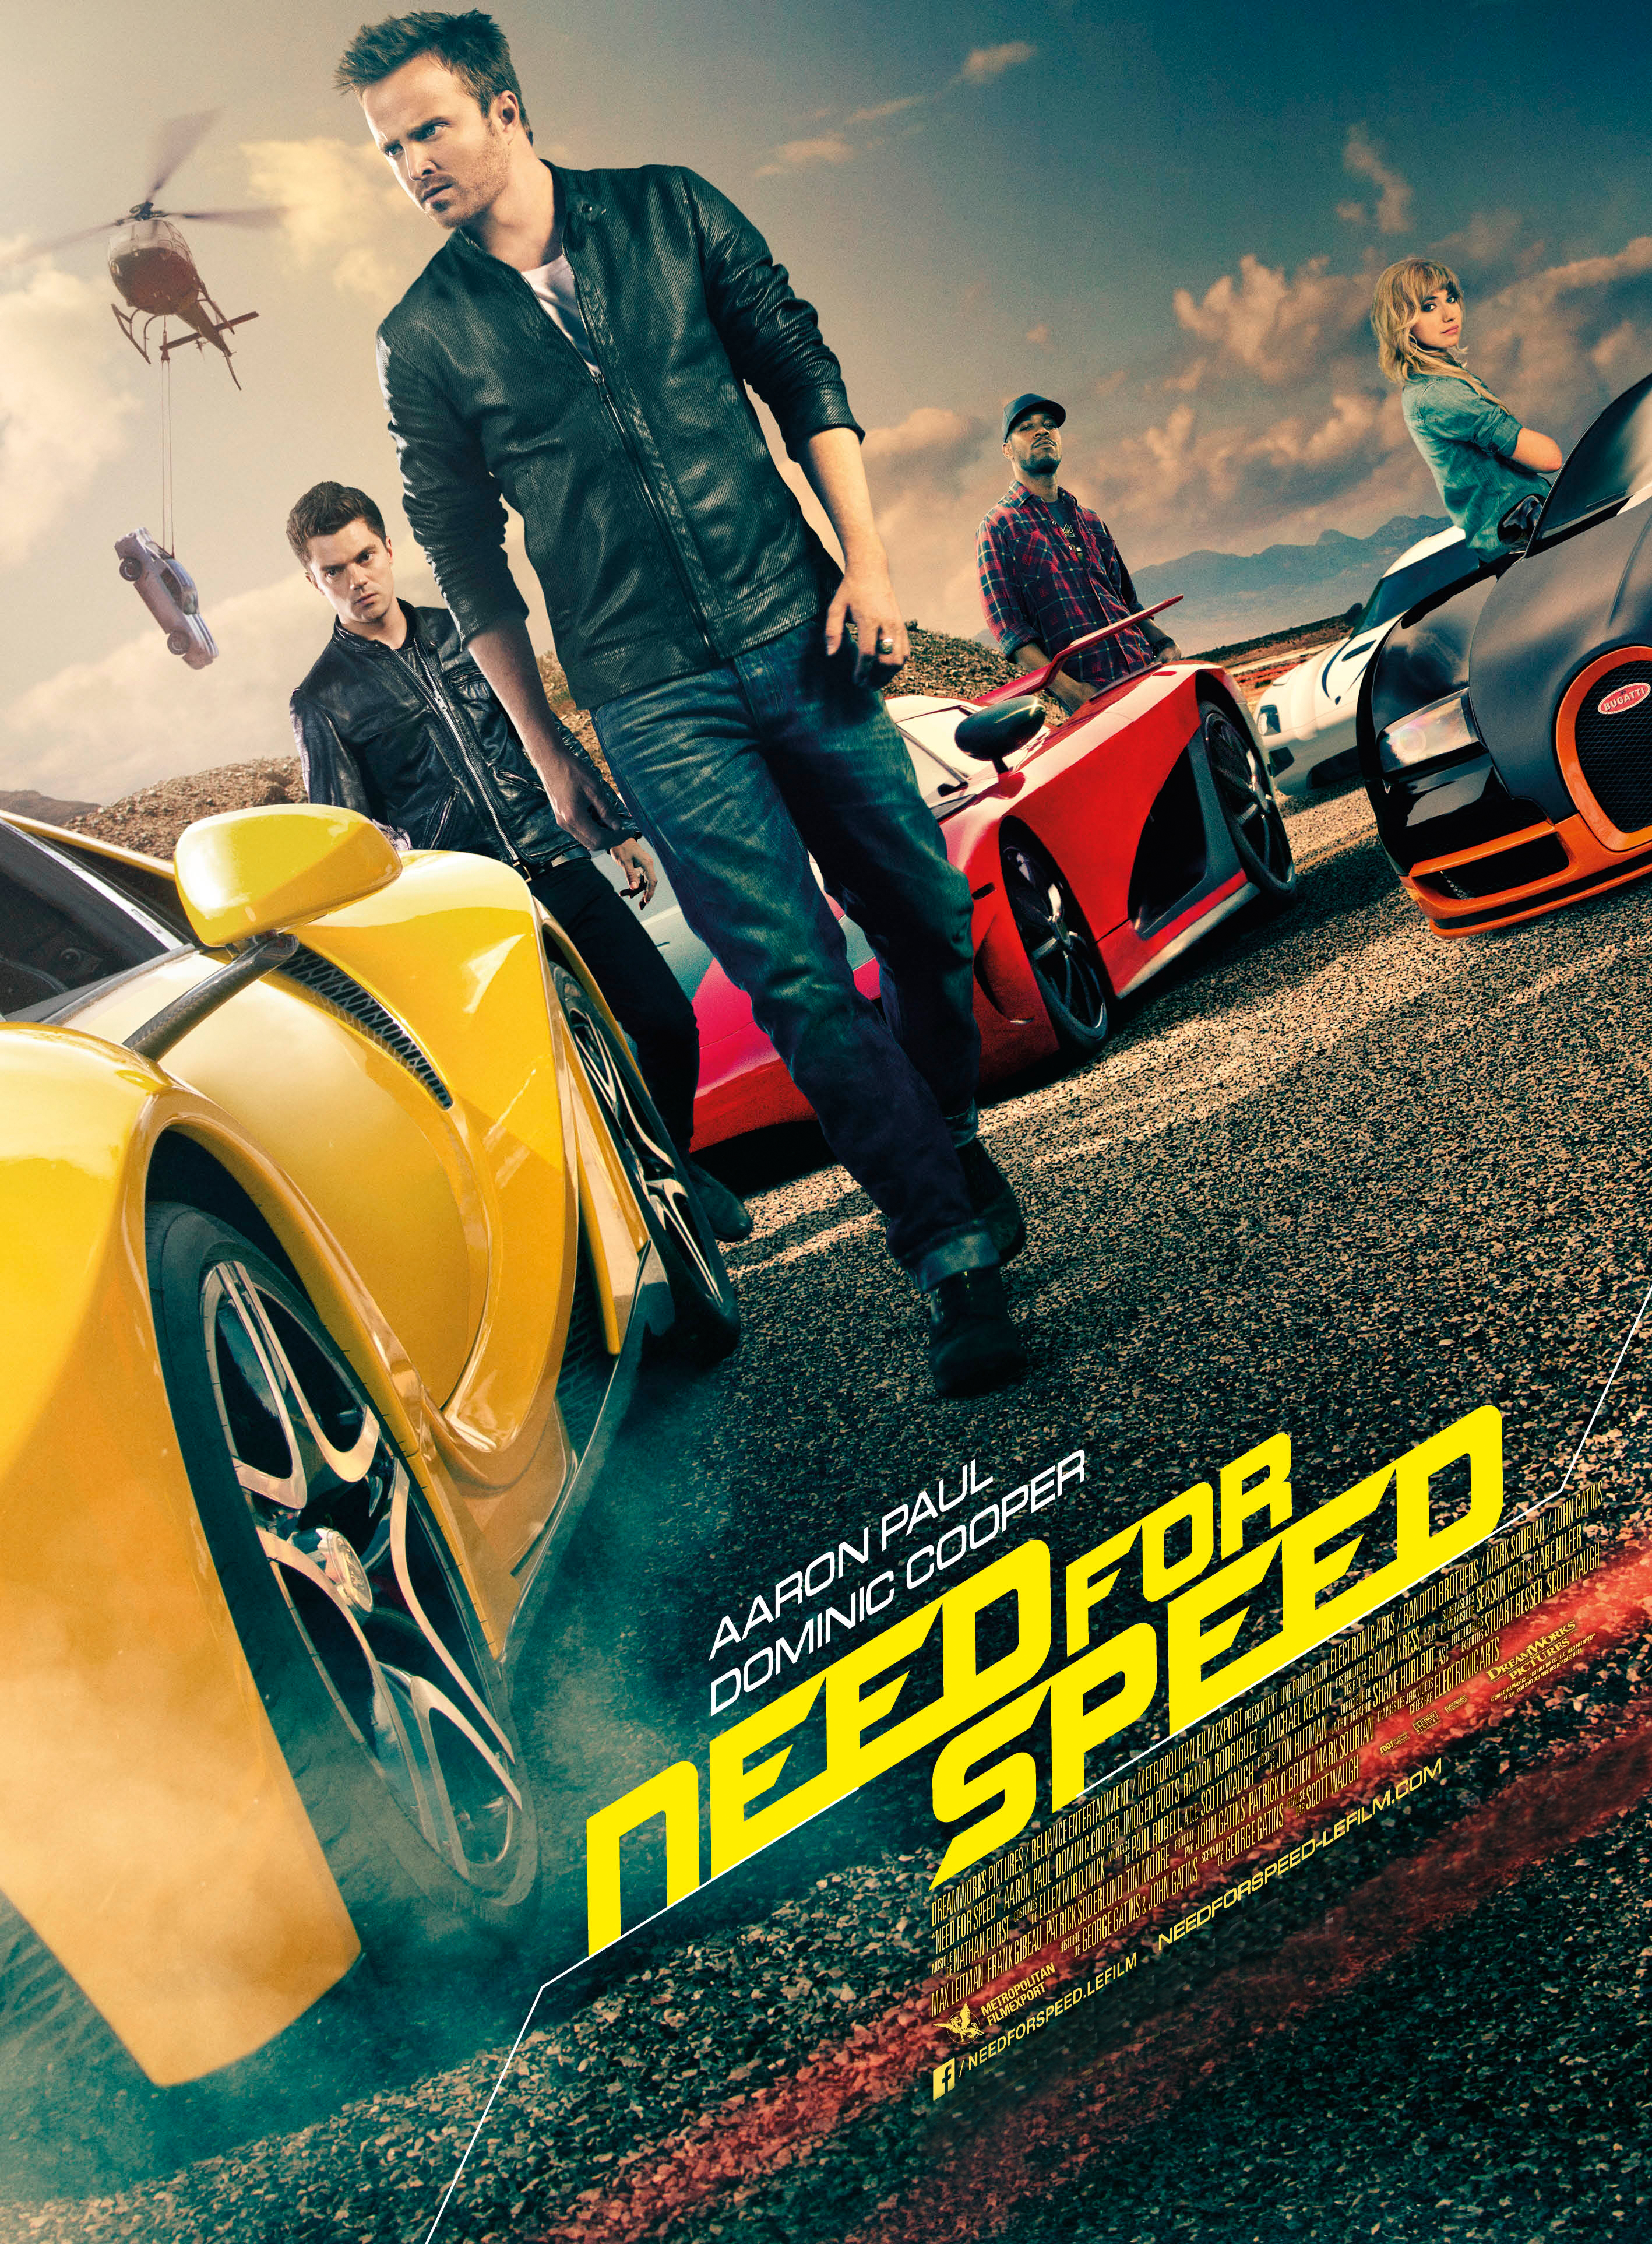 Need for Speed - Movie cast and actor biographies